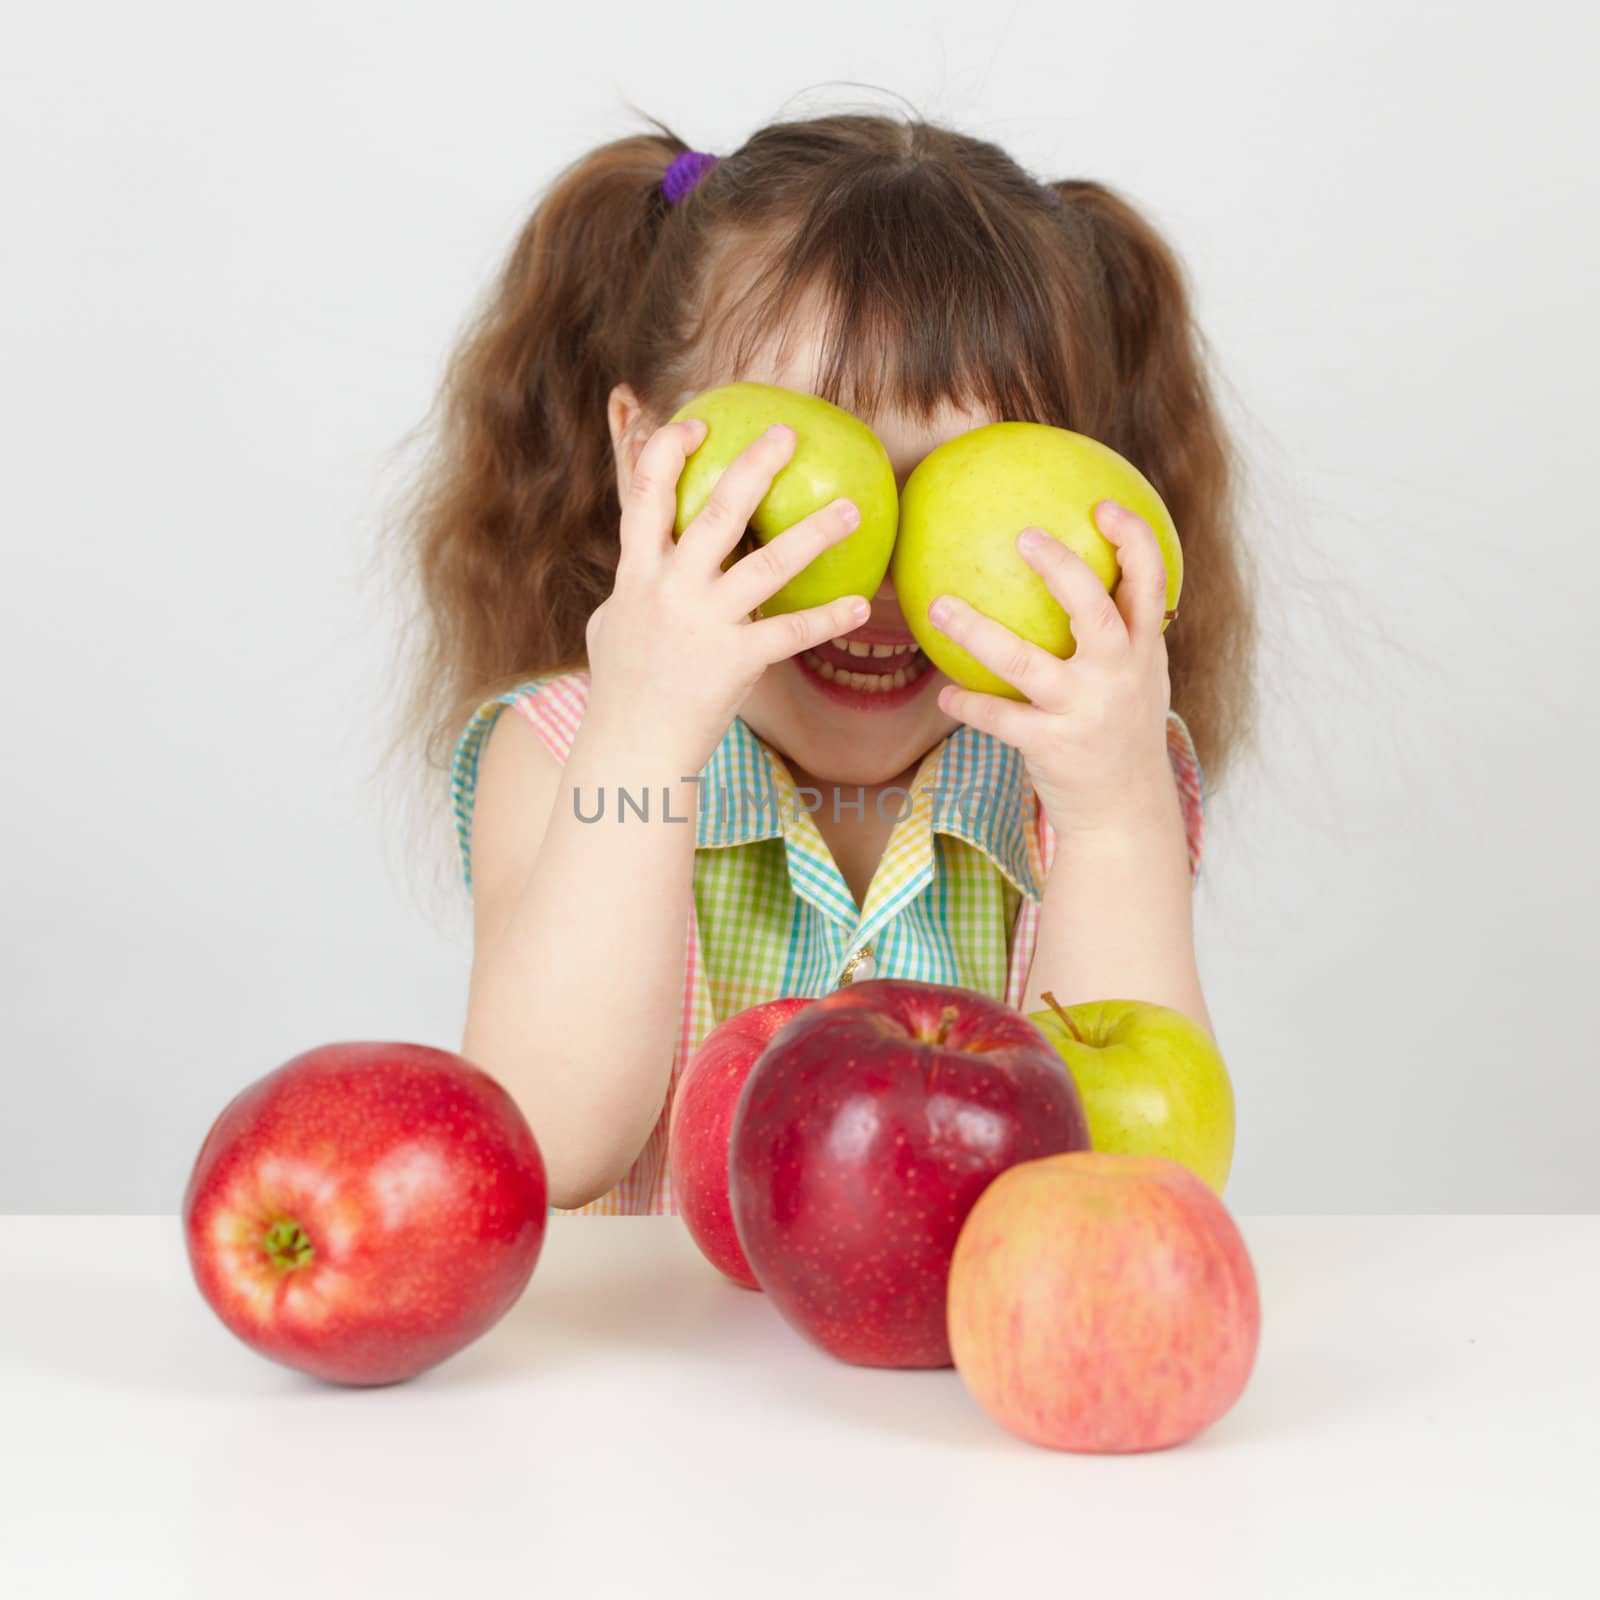 Funny child playing with two apples on table